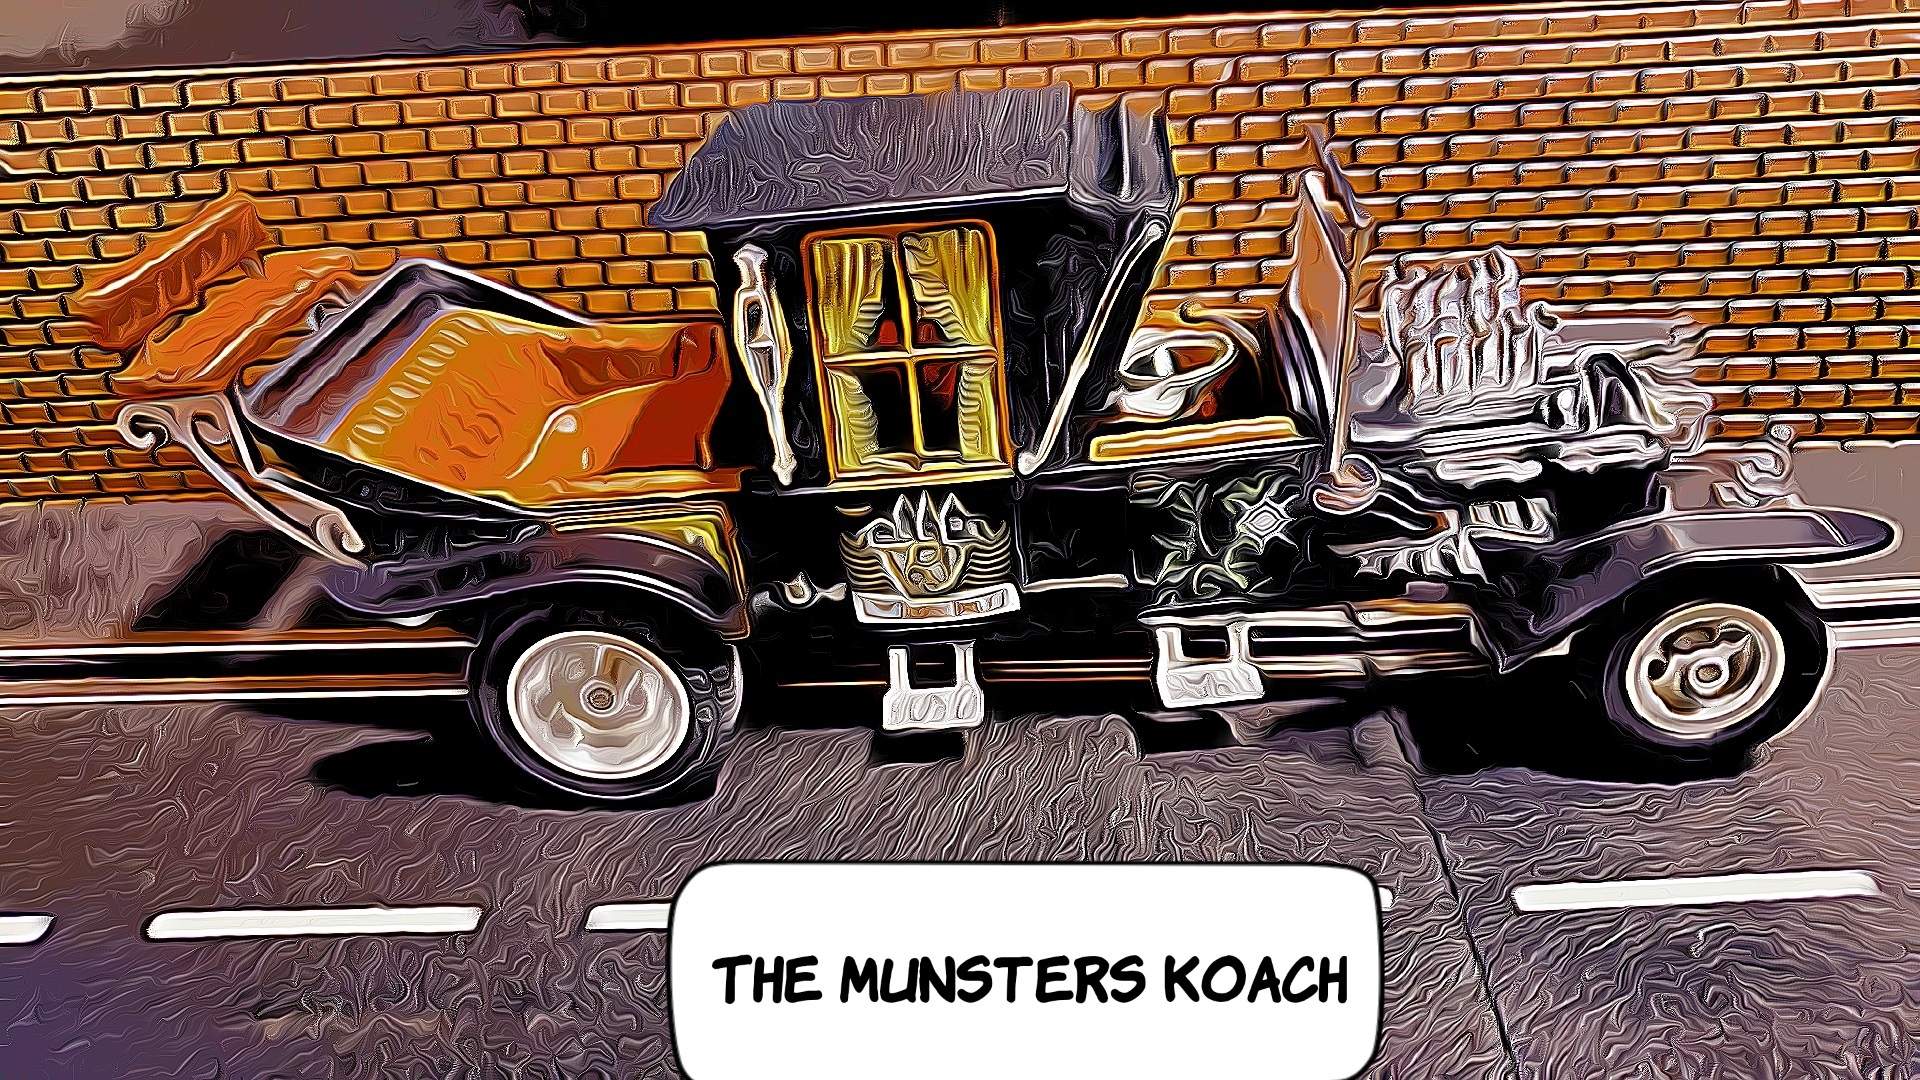 * SALE * The Munster’s, Munster Koach Slot Car 1/24 Scale with Driver